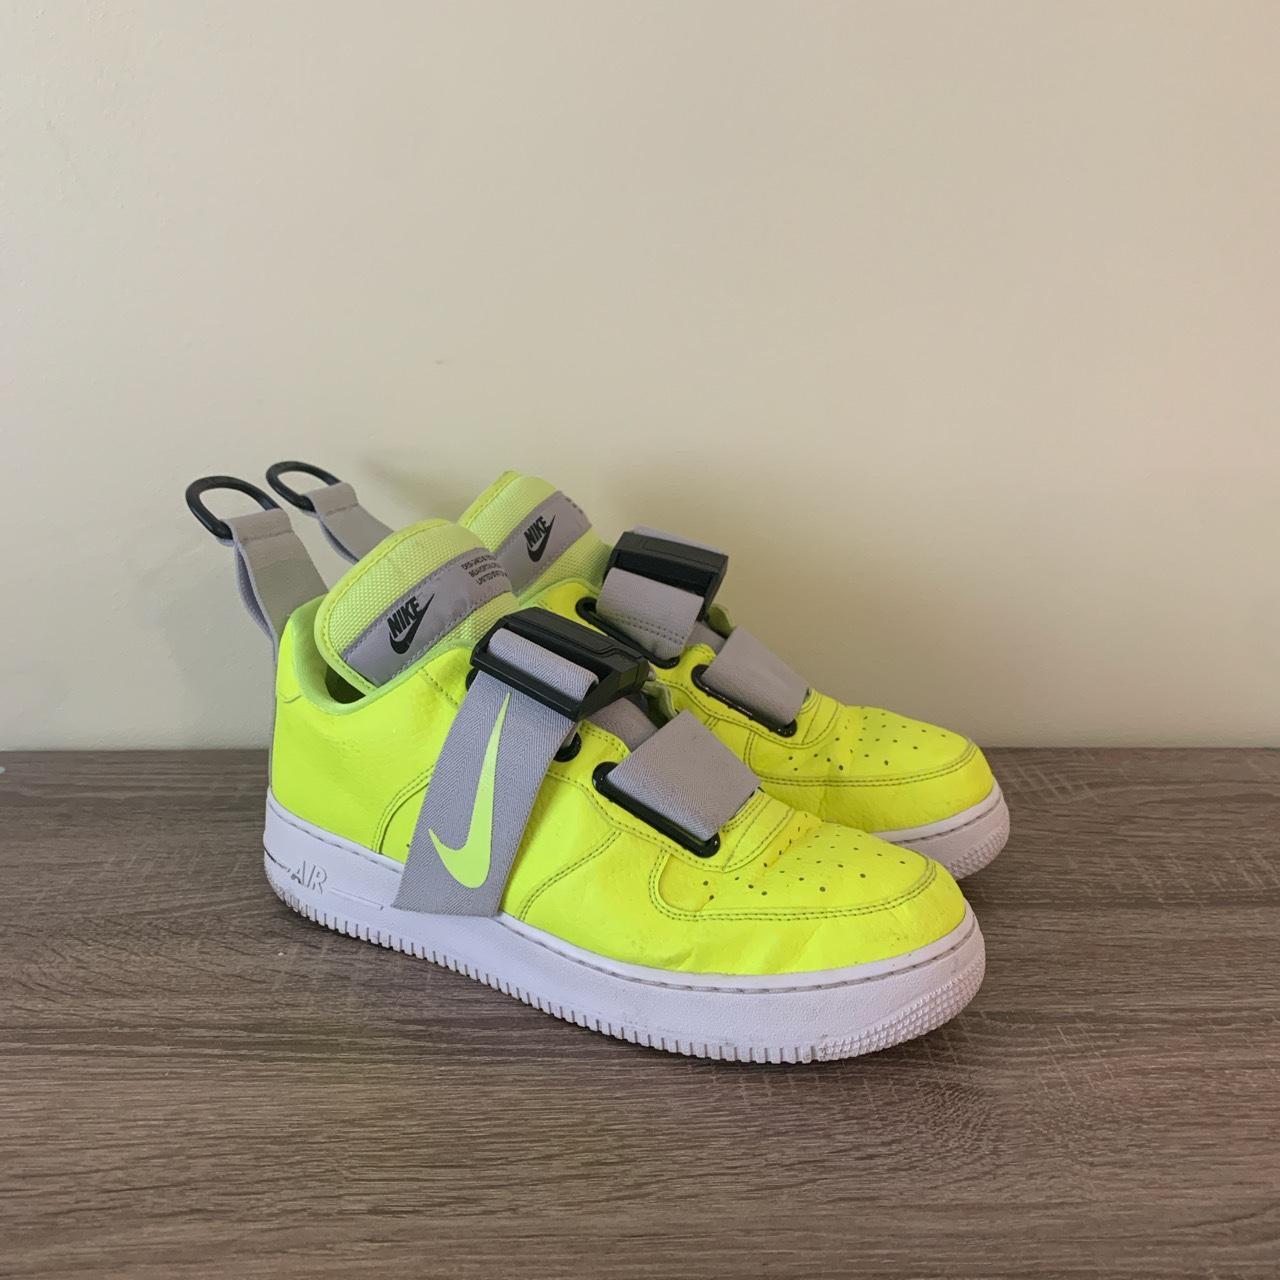 Nike Air Force 1 Utility in Volt